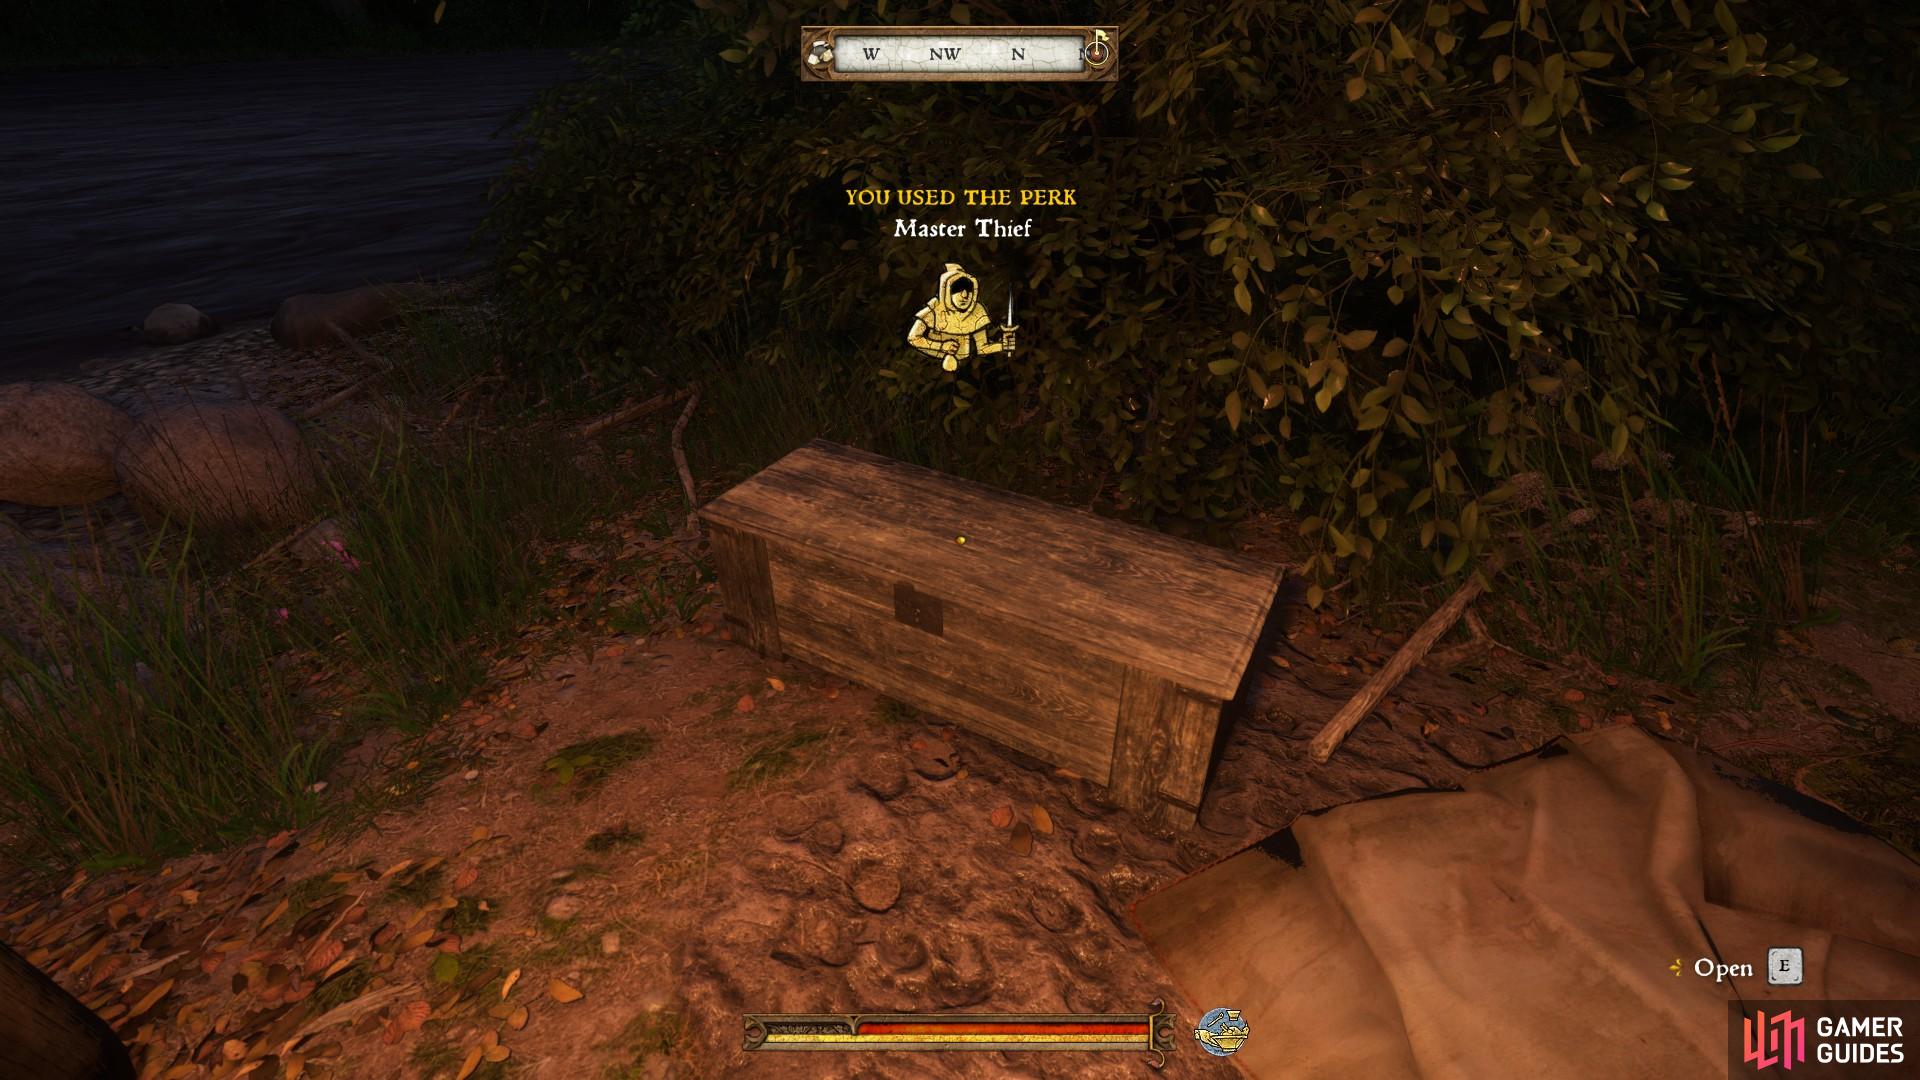 Kill the bandits and loot the chest in the camp to find the moldavite inside.